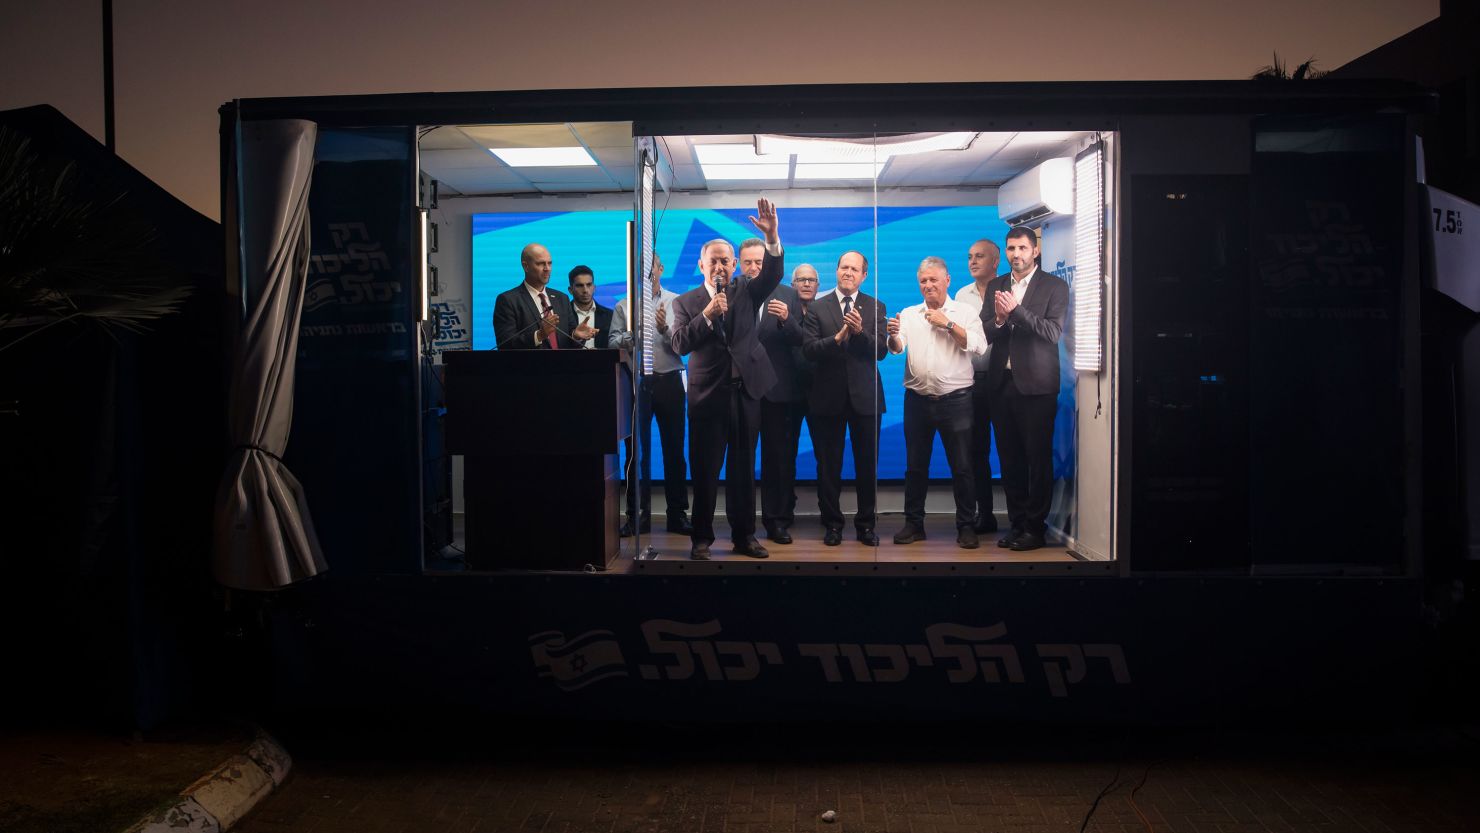 Former Israeli Prime Minster and Likud party leader Benjamin Netanyahu speaks to supporters in a modified truck during a campaign event on October 6 in Hadera, Israel. 